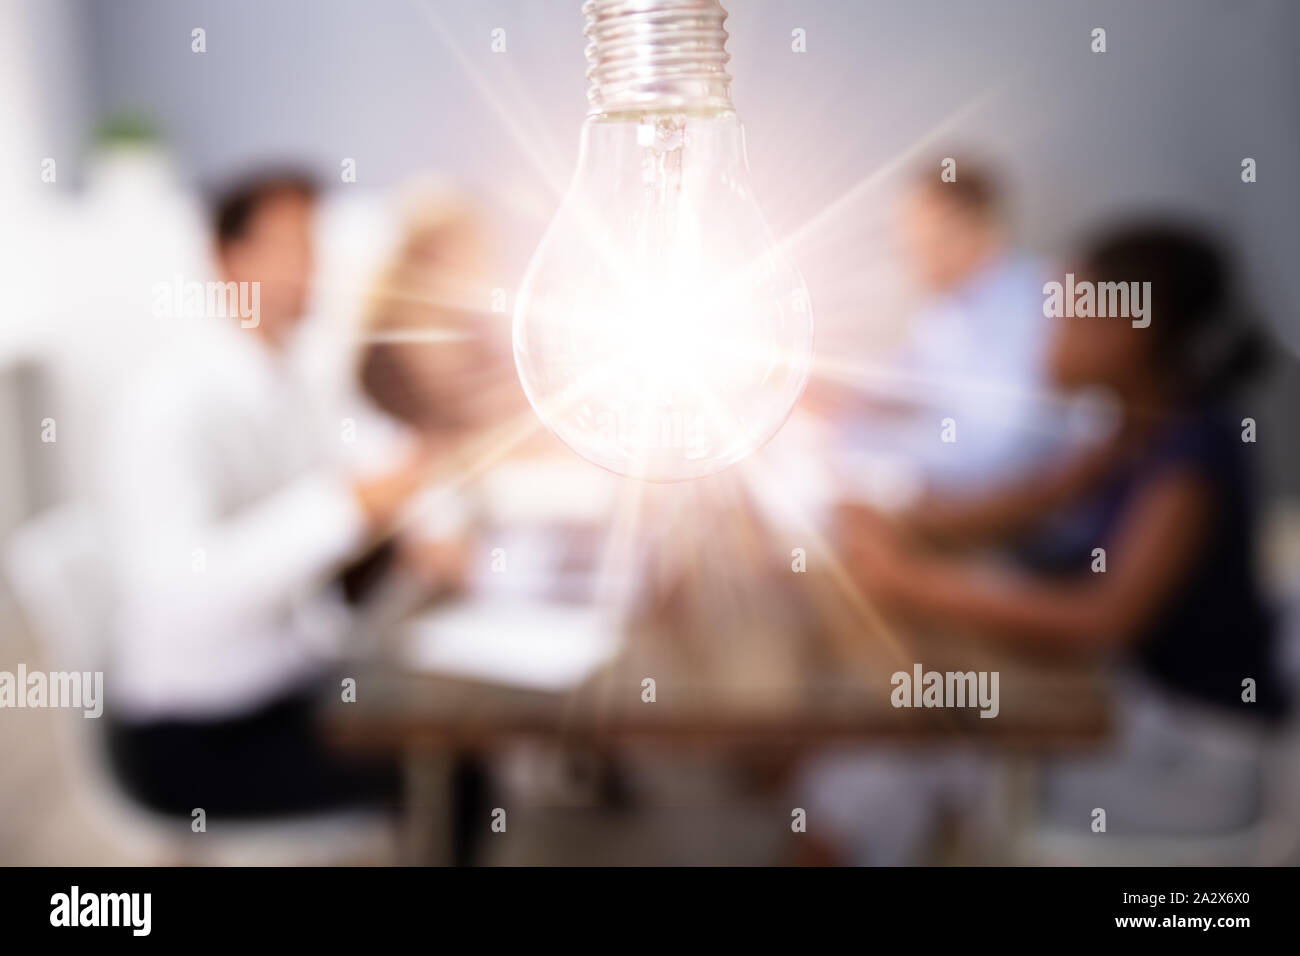 Lightbulb On In Front Of People In Creative Meeting Stock Photo